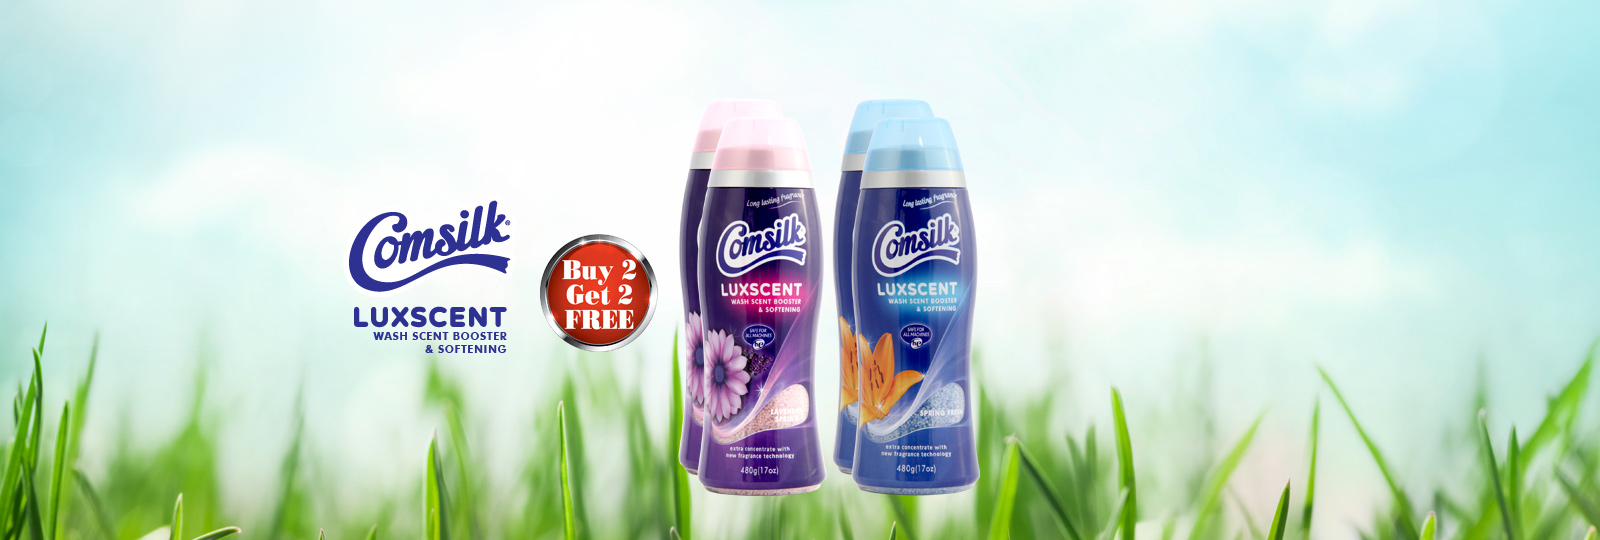 Discount for 4-pack mix and match Comsilk